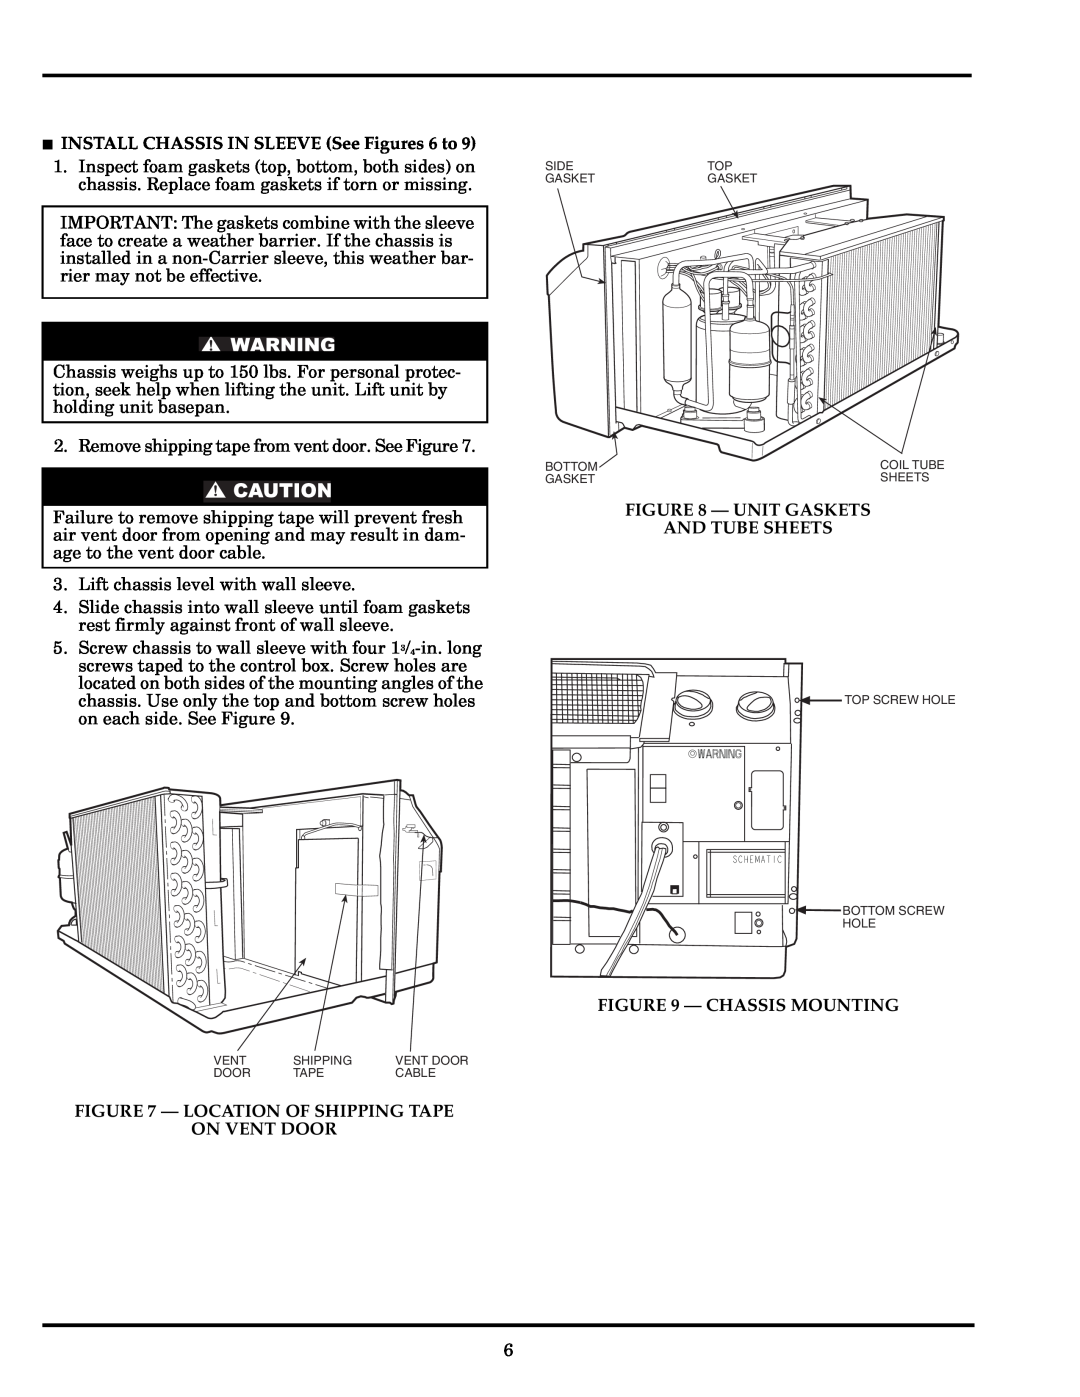 Carrier Access 52P INSTALL CHASSIS IN SLEEVE See Figures 6 to, Location Of Shipping Tape On Vent Door, Chassis Mounting 